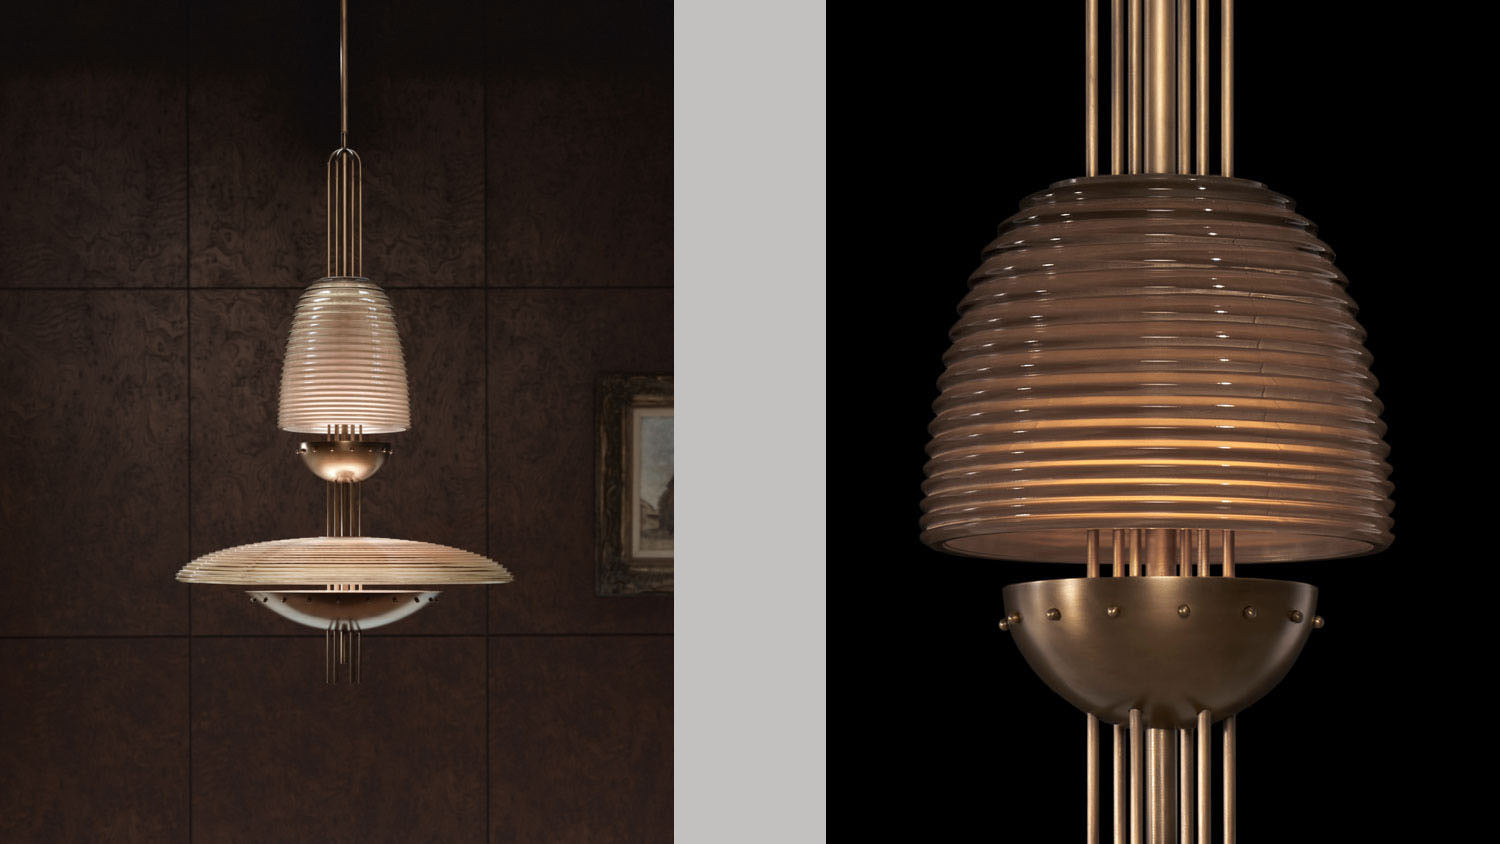 SIGNAL : Z ceiling pendant in Aged Brass with Smoked Glass, alongside a close up image of the same ceiling pendant showing details of the finish. 